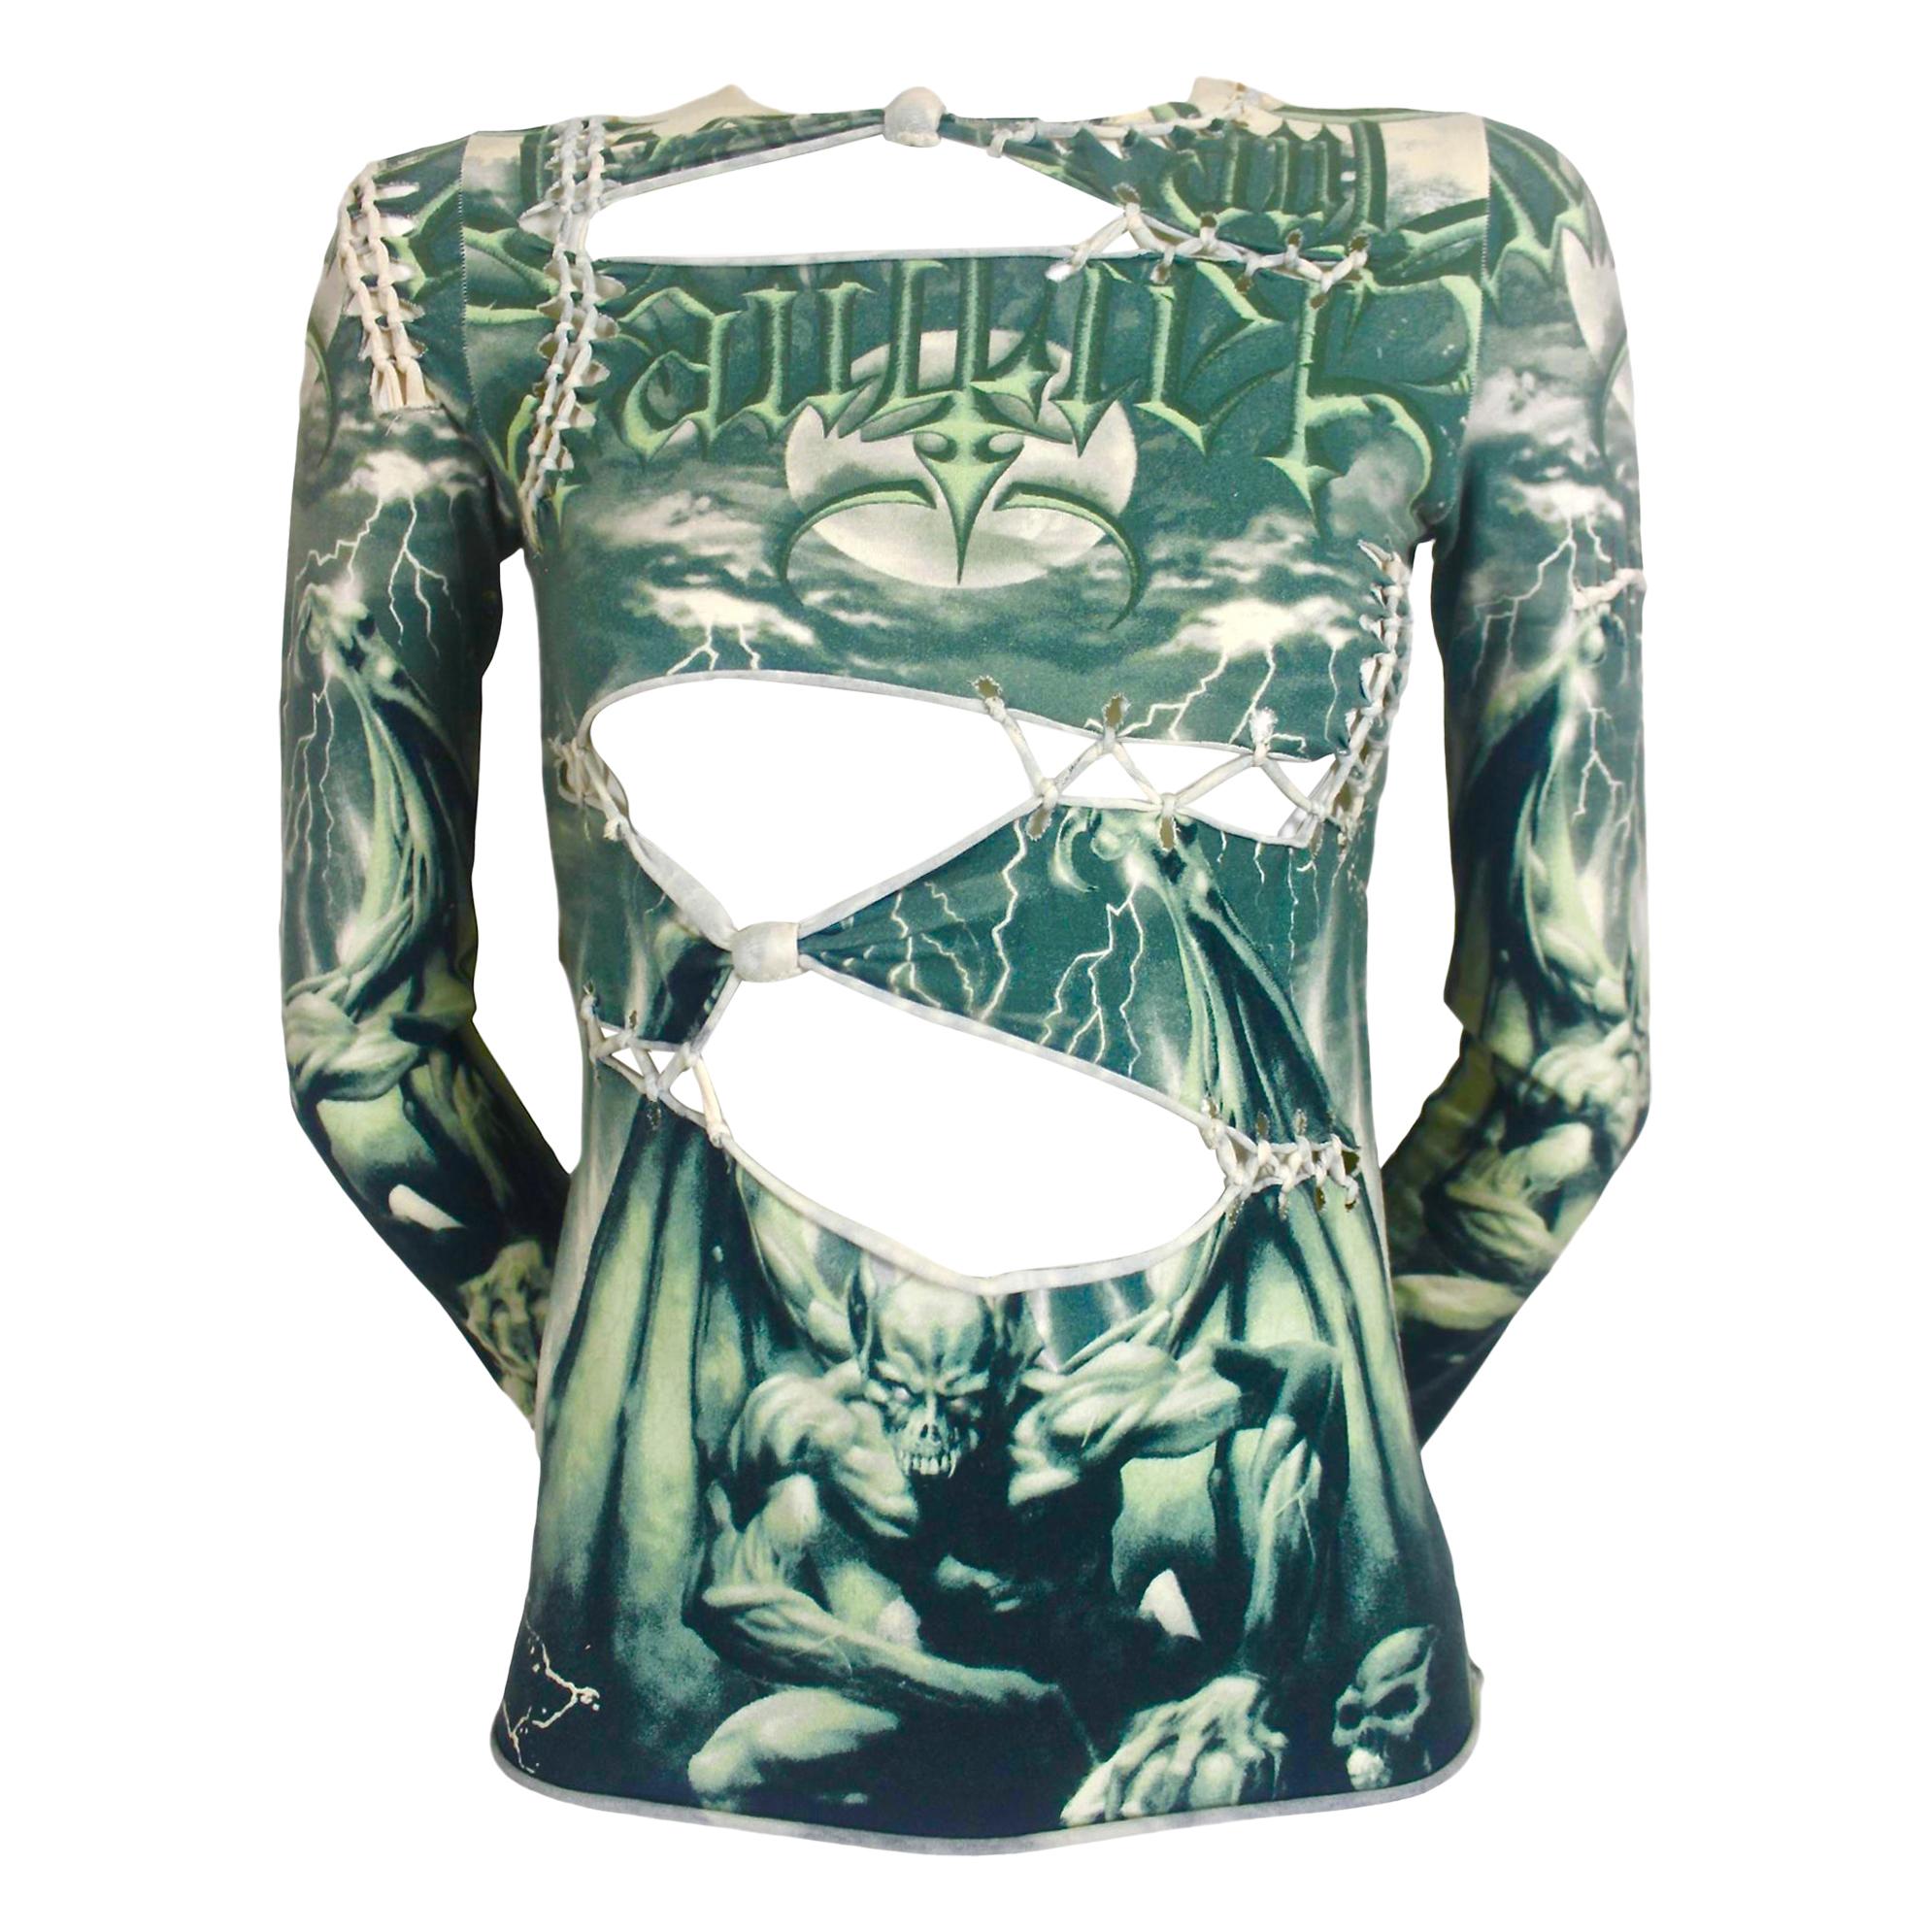 Jean Paul Gaultier Slashed and Stitched Demon Print T-Shirt at 